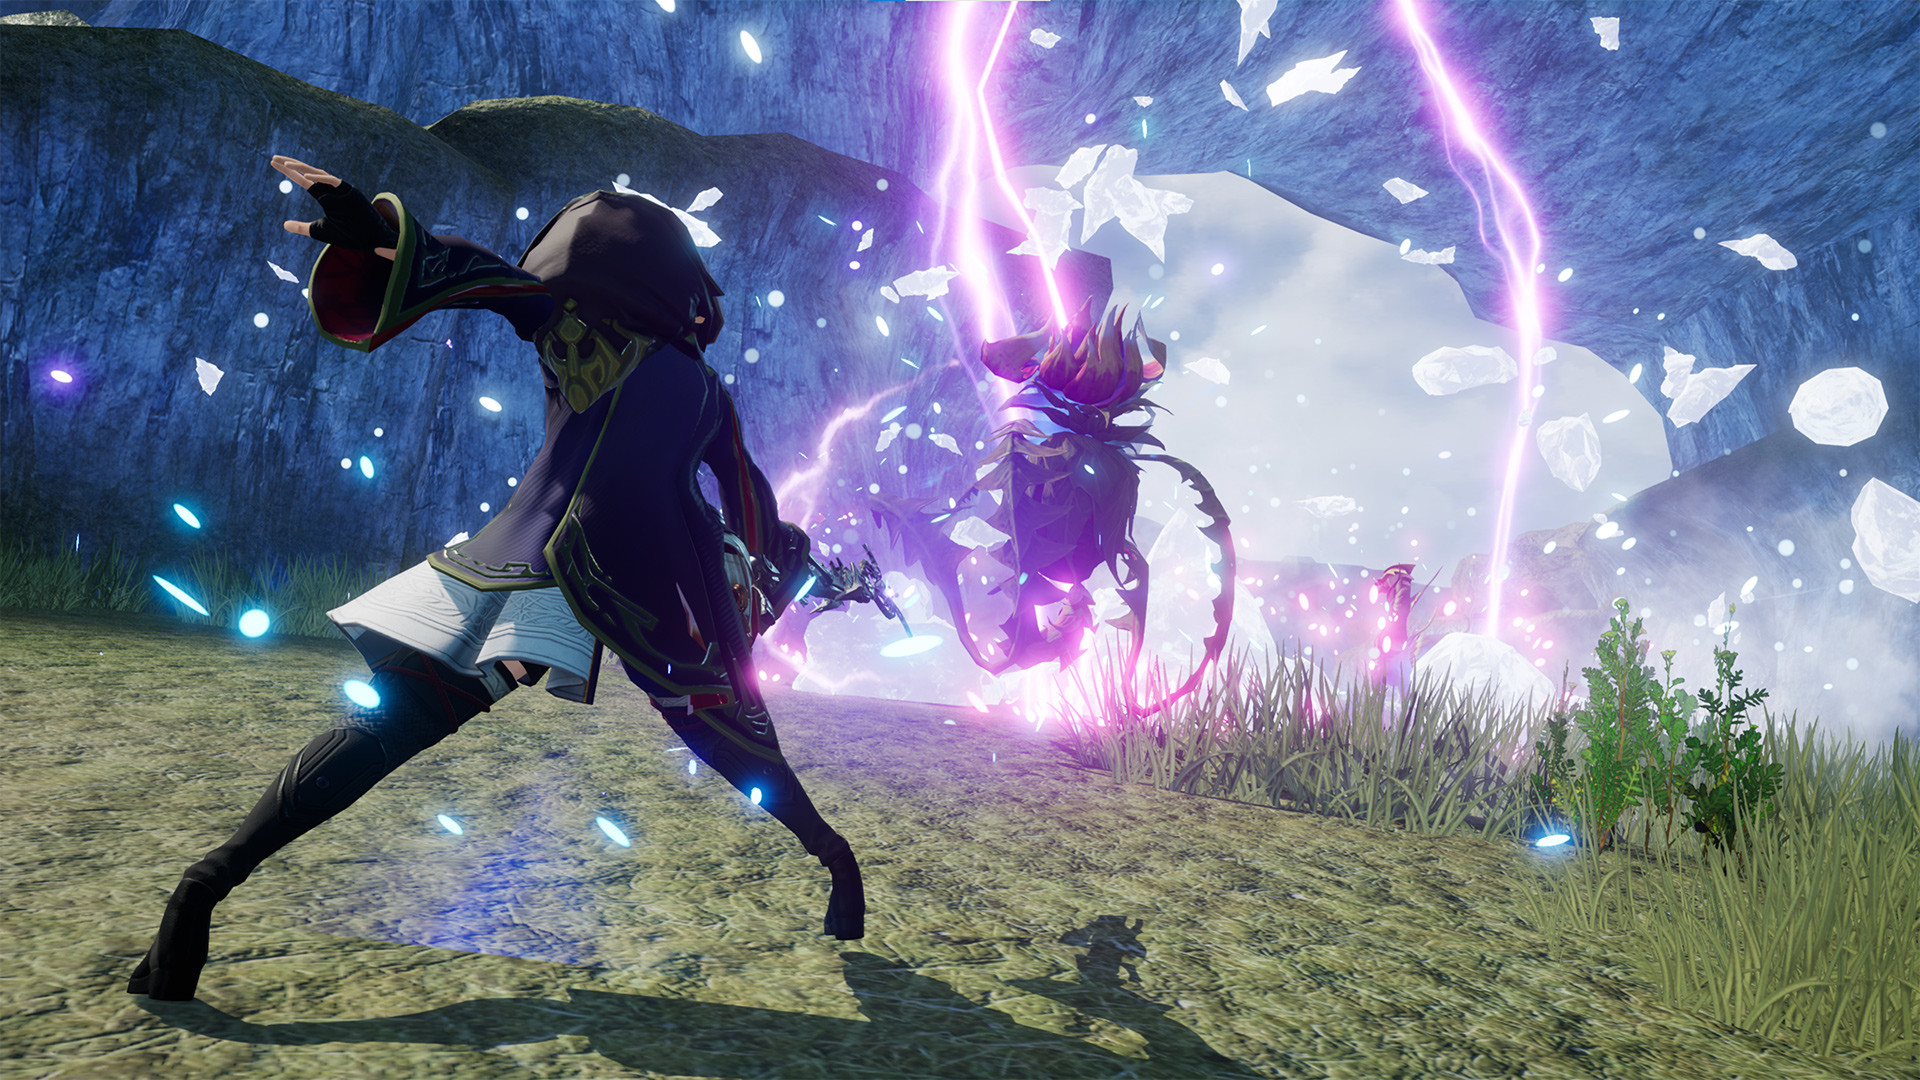 Screenshot from upcoming game Harvestella, by Square Enix.